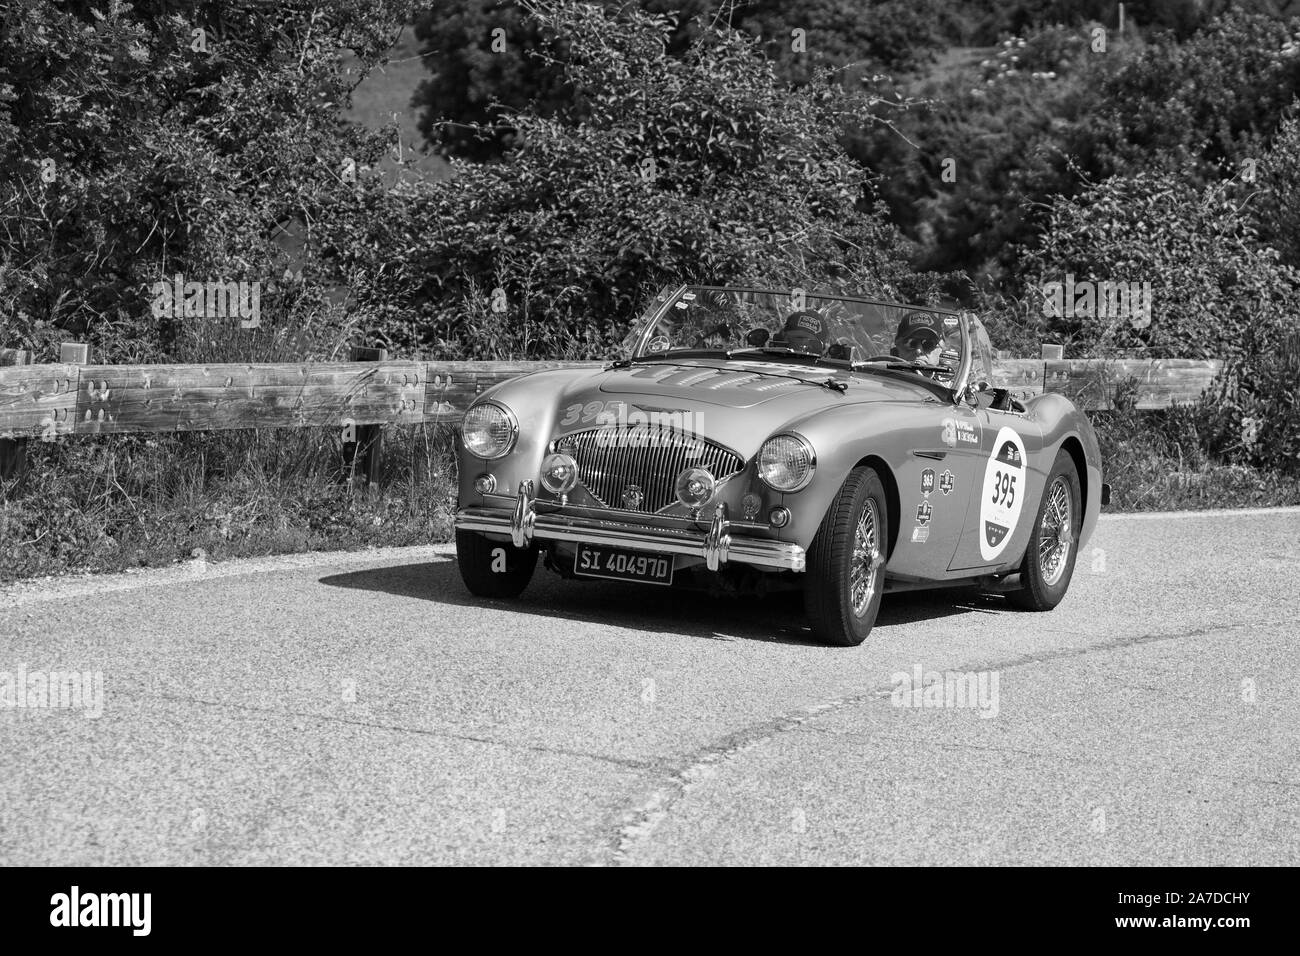 Healey sports car Black and White Stock Photos & Images - Alamy